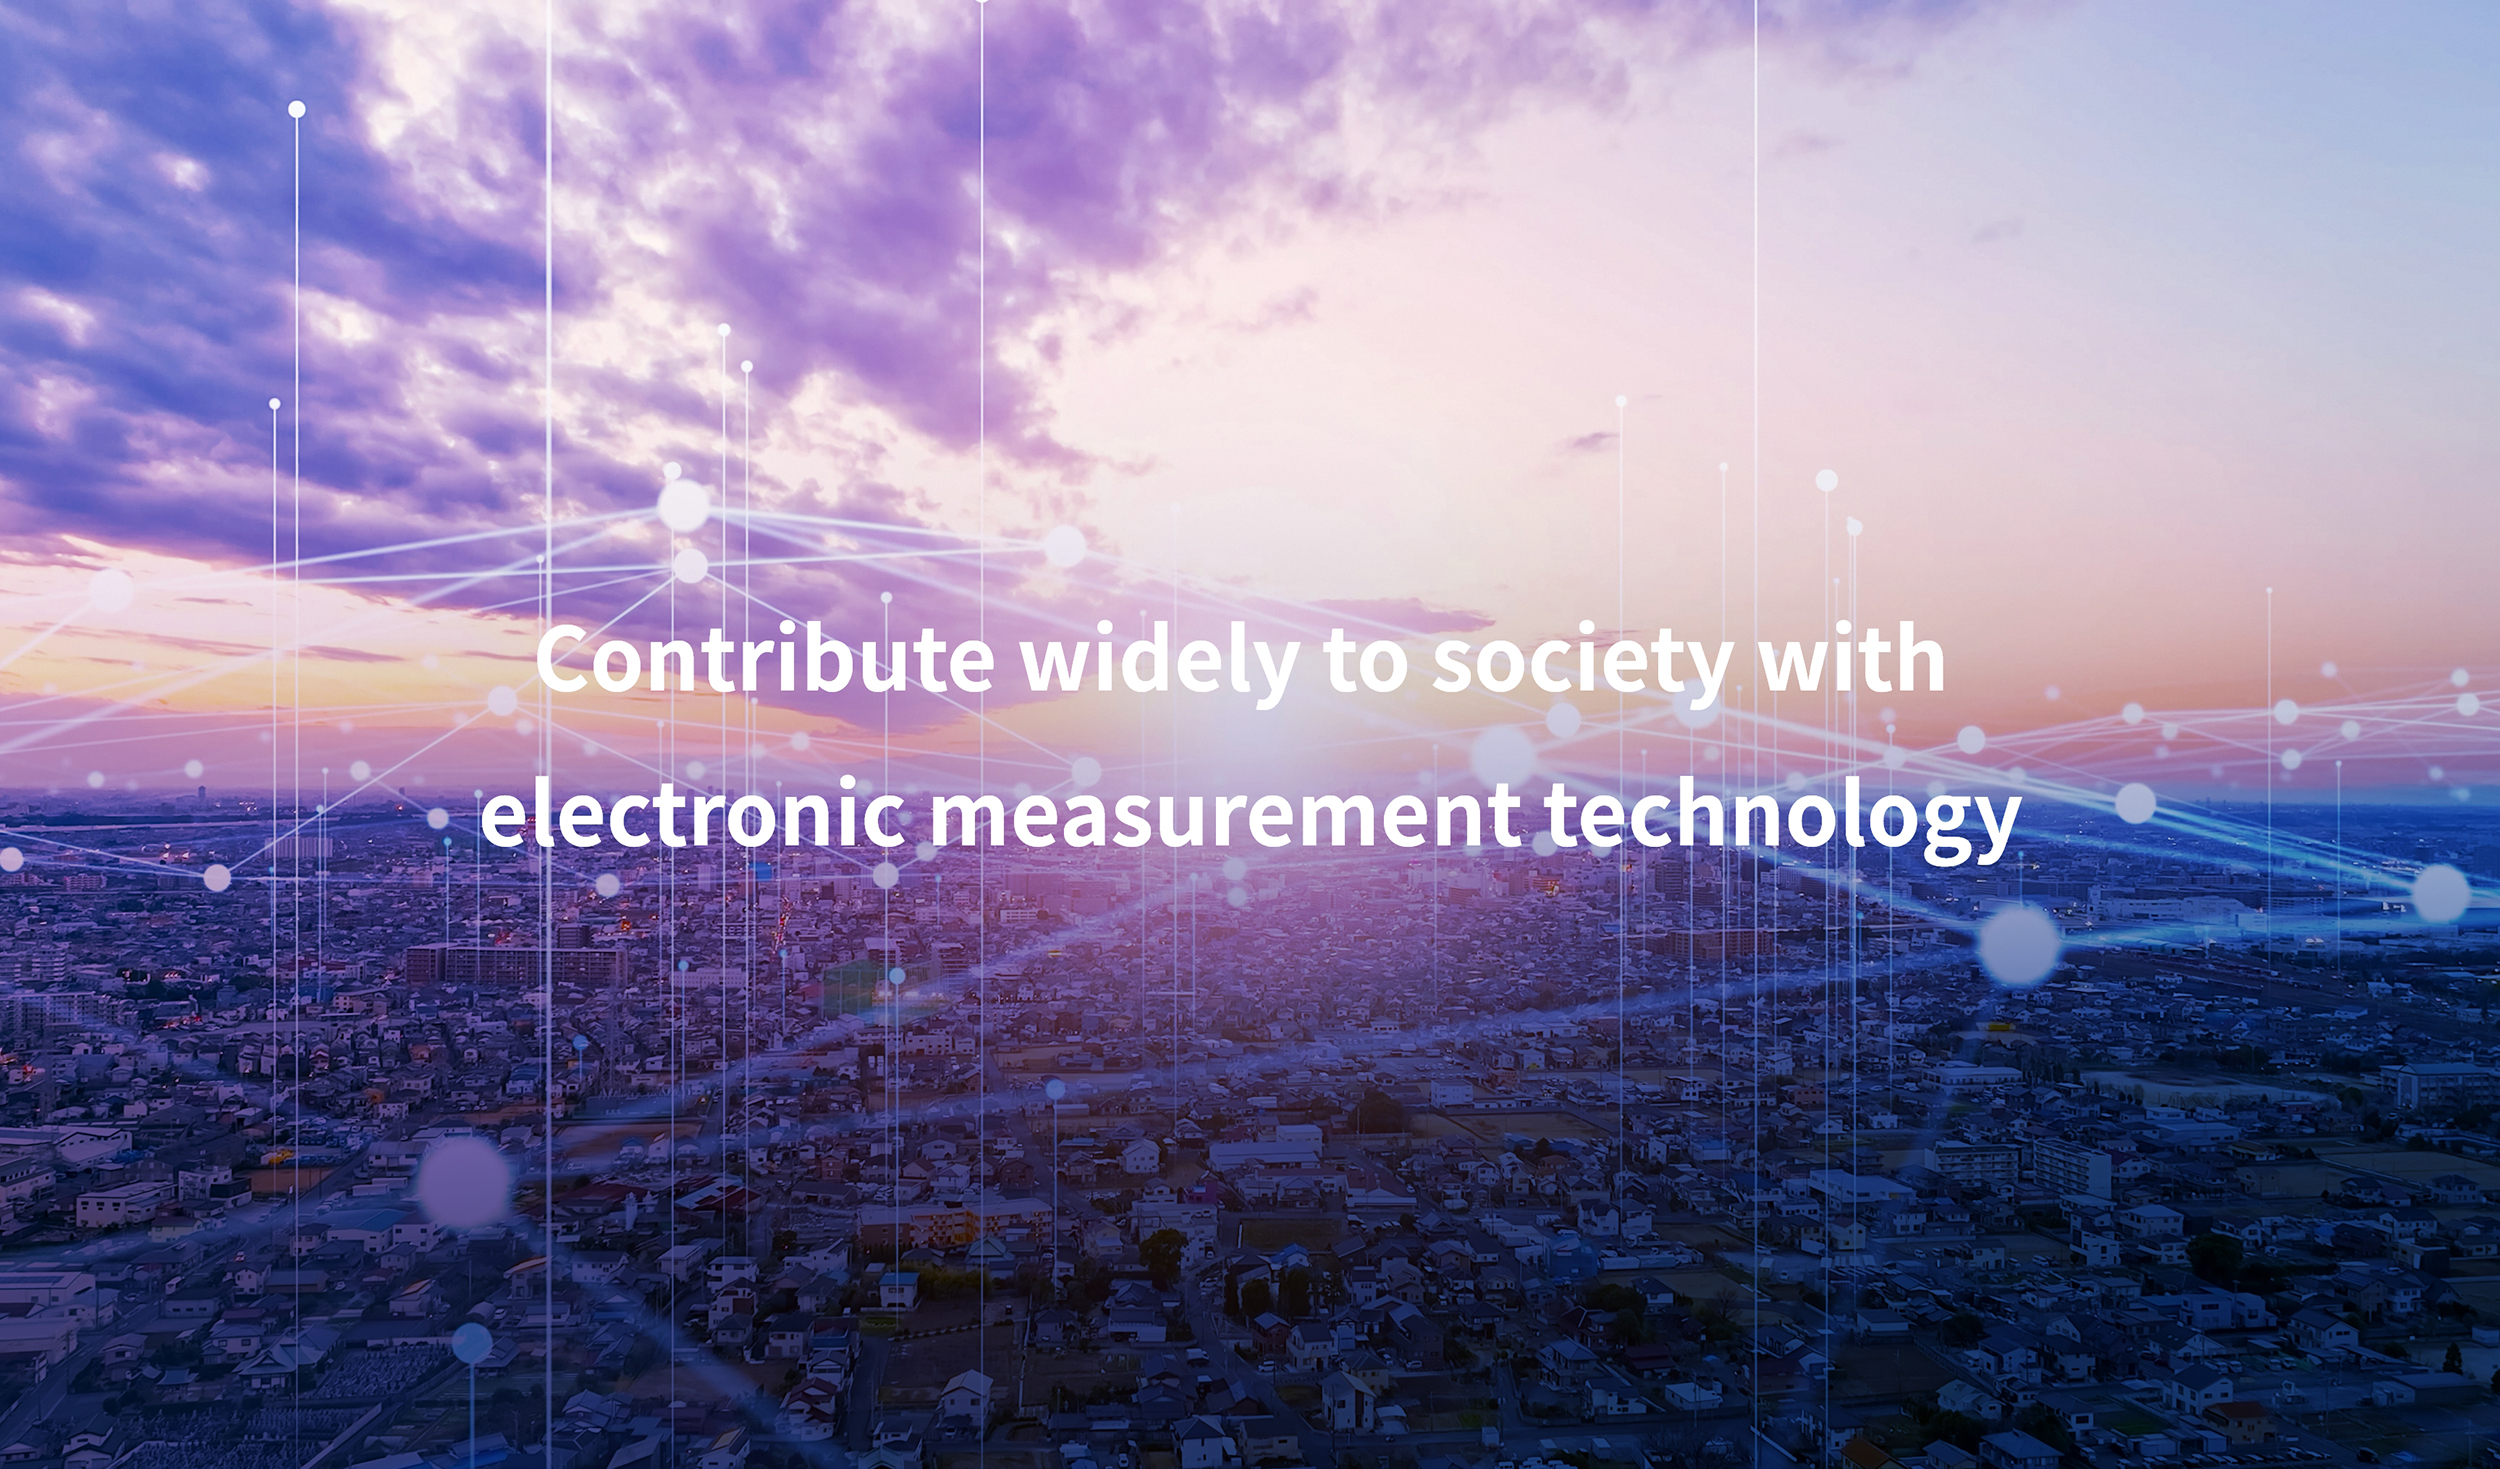 Contribute widely to society with electronic measurement technology